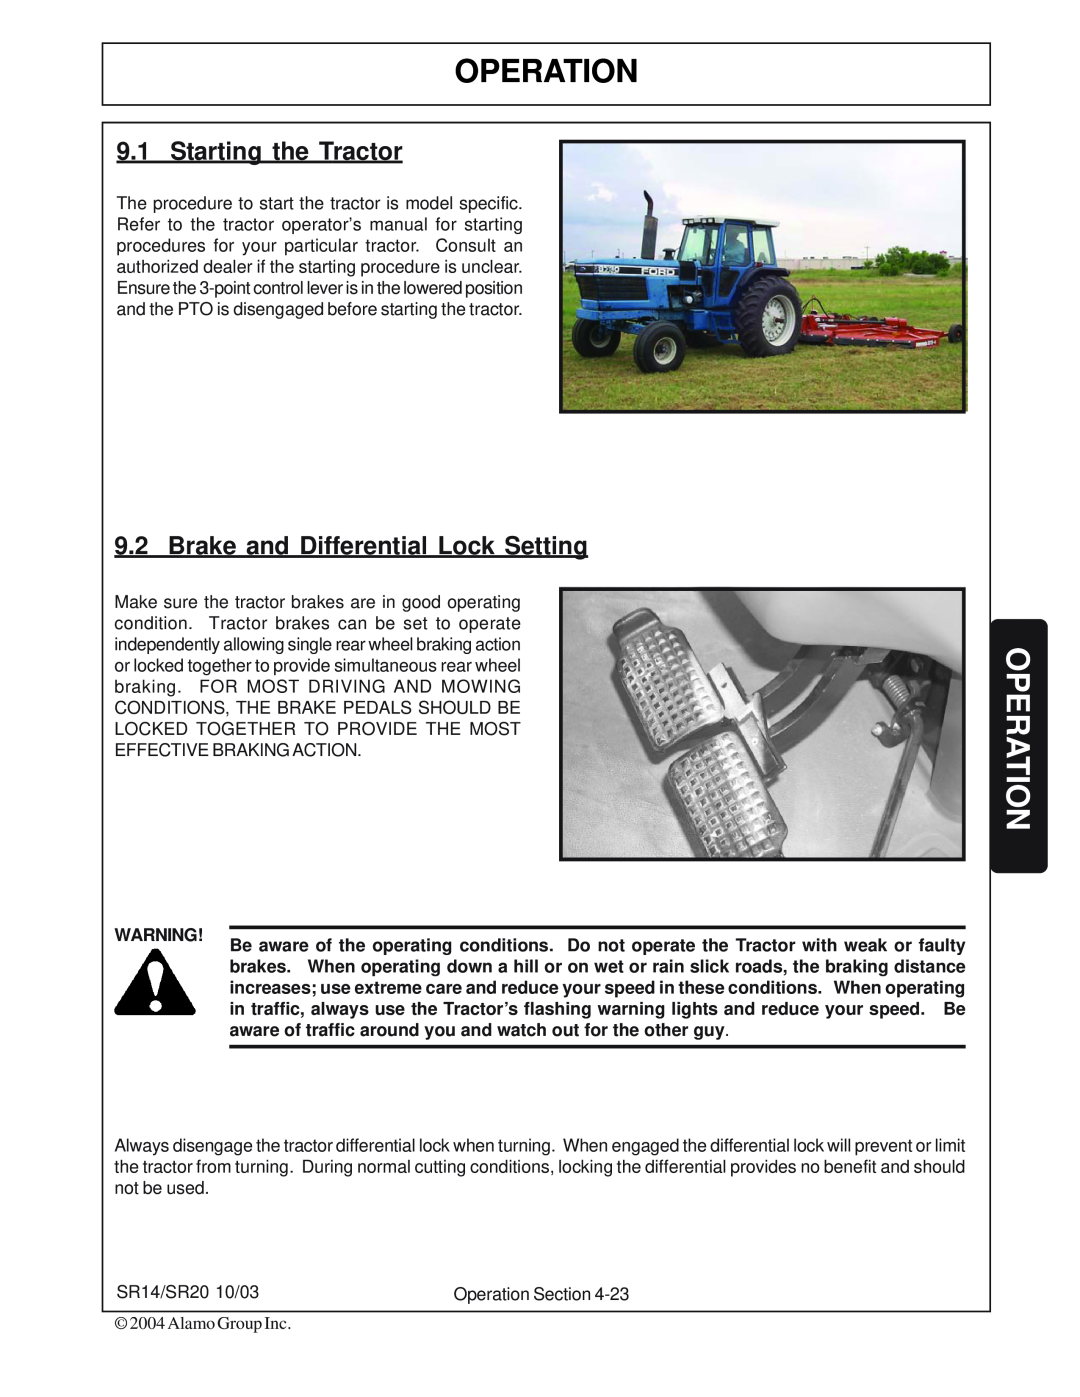 Alamo SR14, SR20 manual Operation, Starting the Tractor, Brake and Differential Lock Setting 